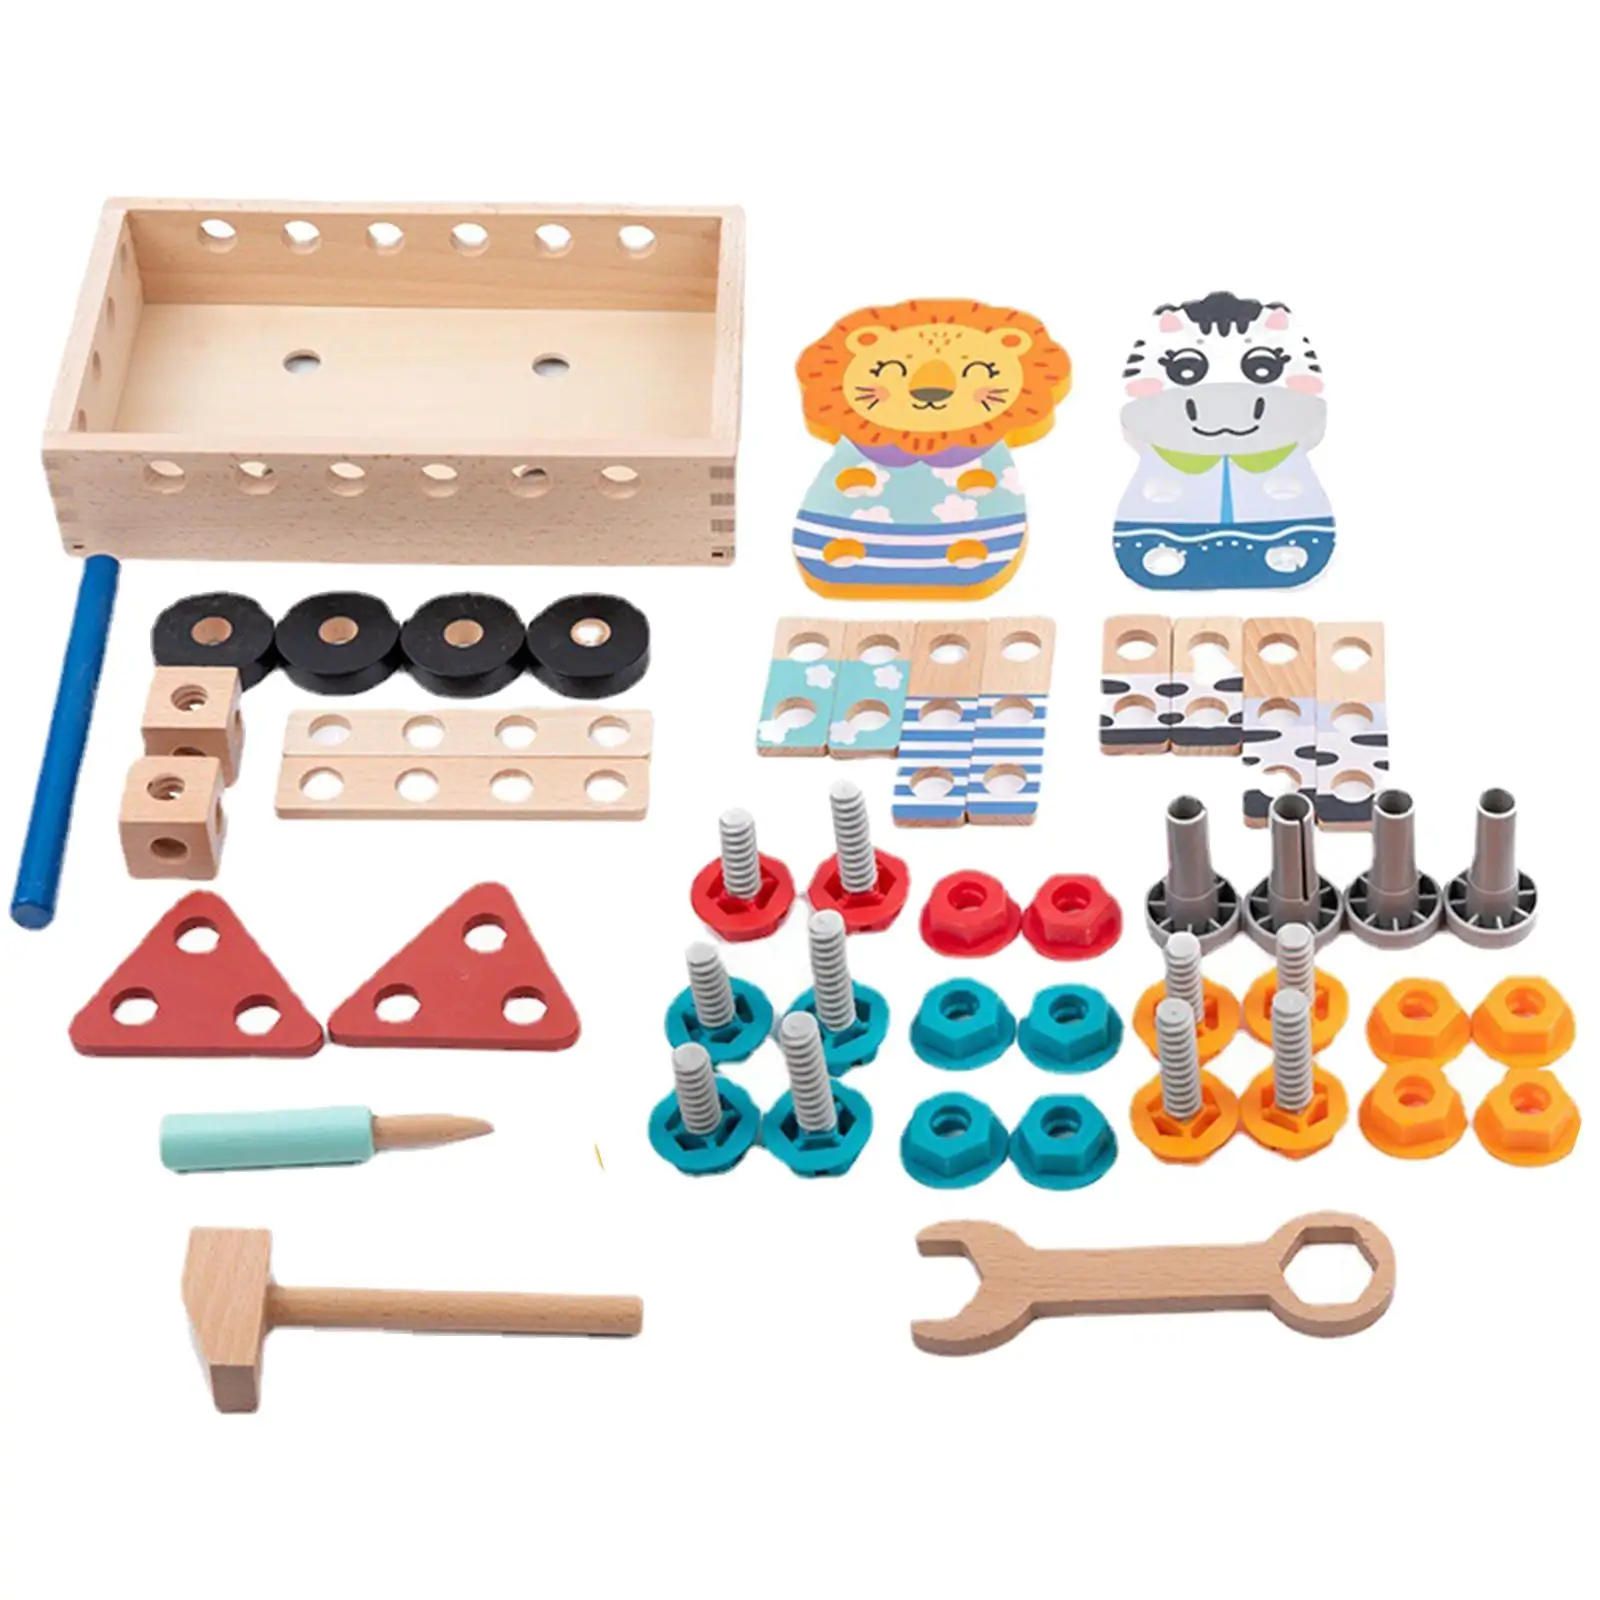 Toddler Tool Set Creative Basic Skills Montessori DIY Construction Toy for Outdoor Indoor Education Role education Learning